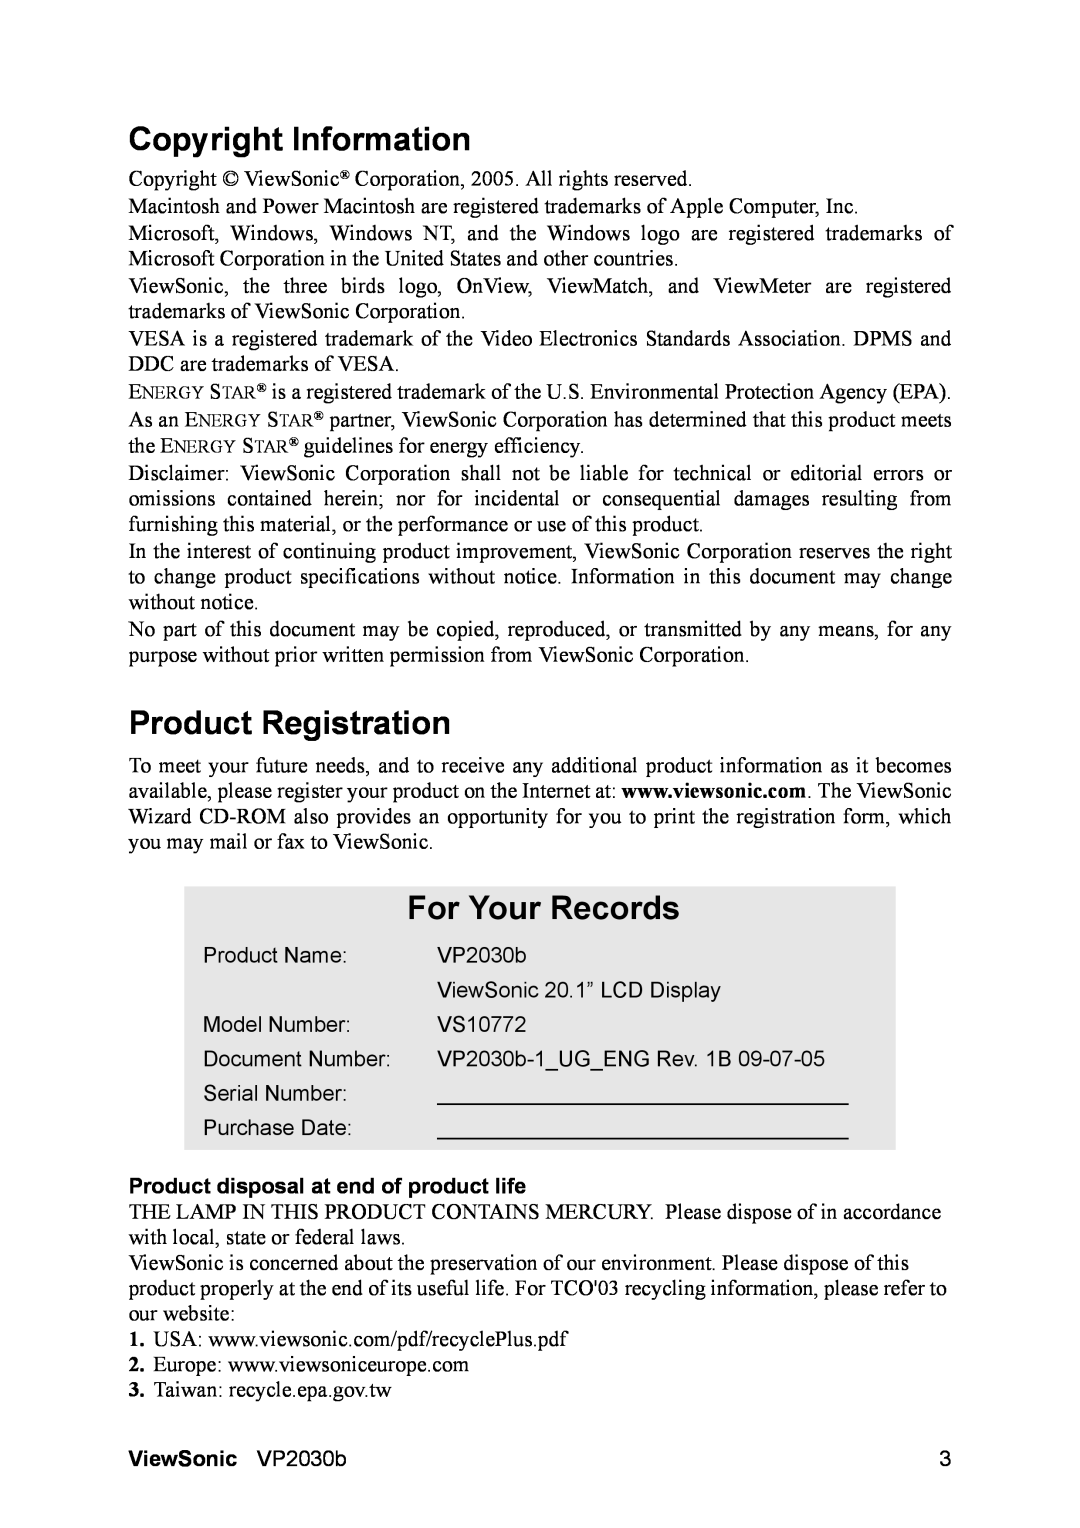 ViewSonic VP2030B Copyright Information, Product Registration, For Your Records, Product disposal at end of product life 